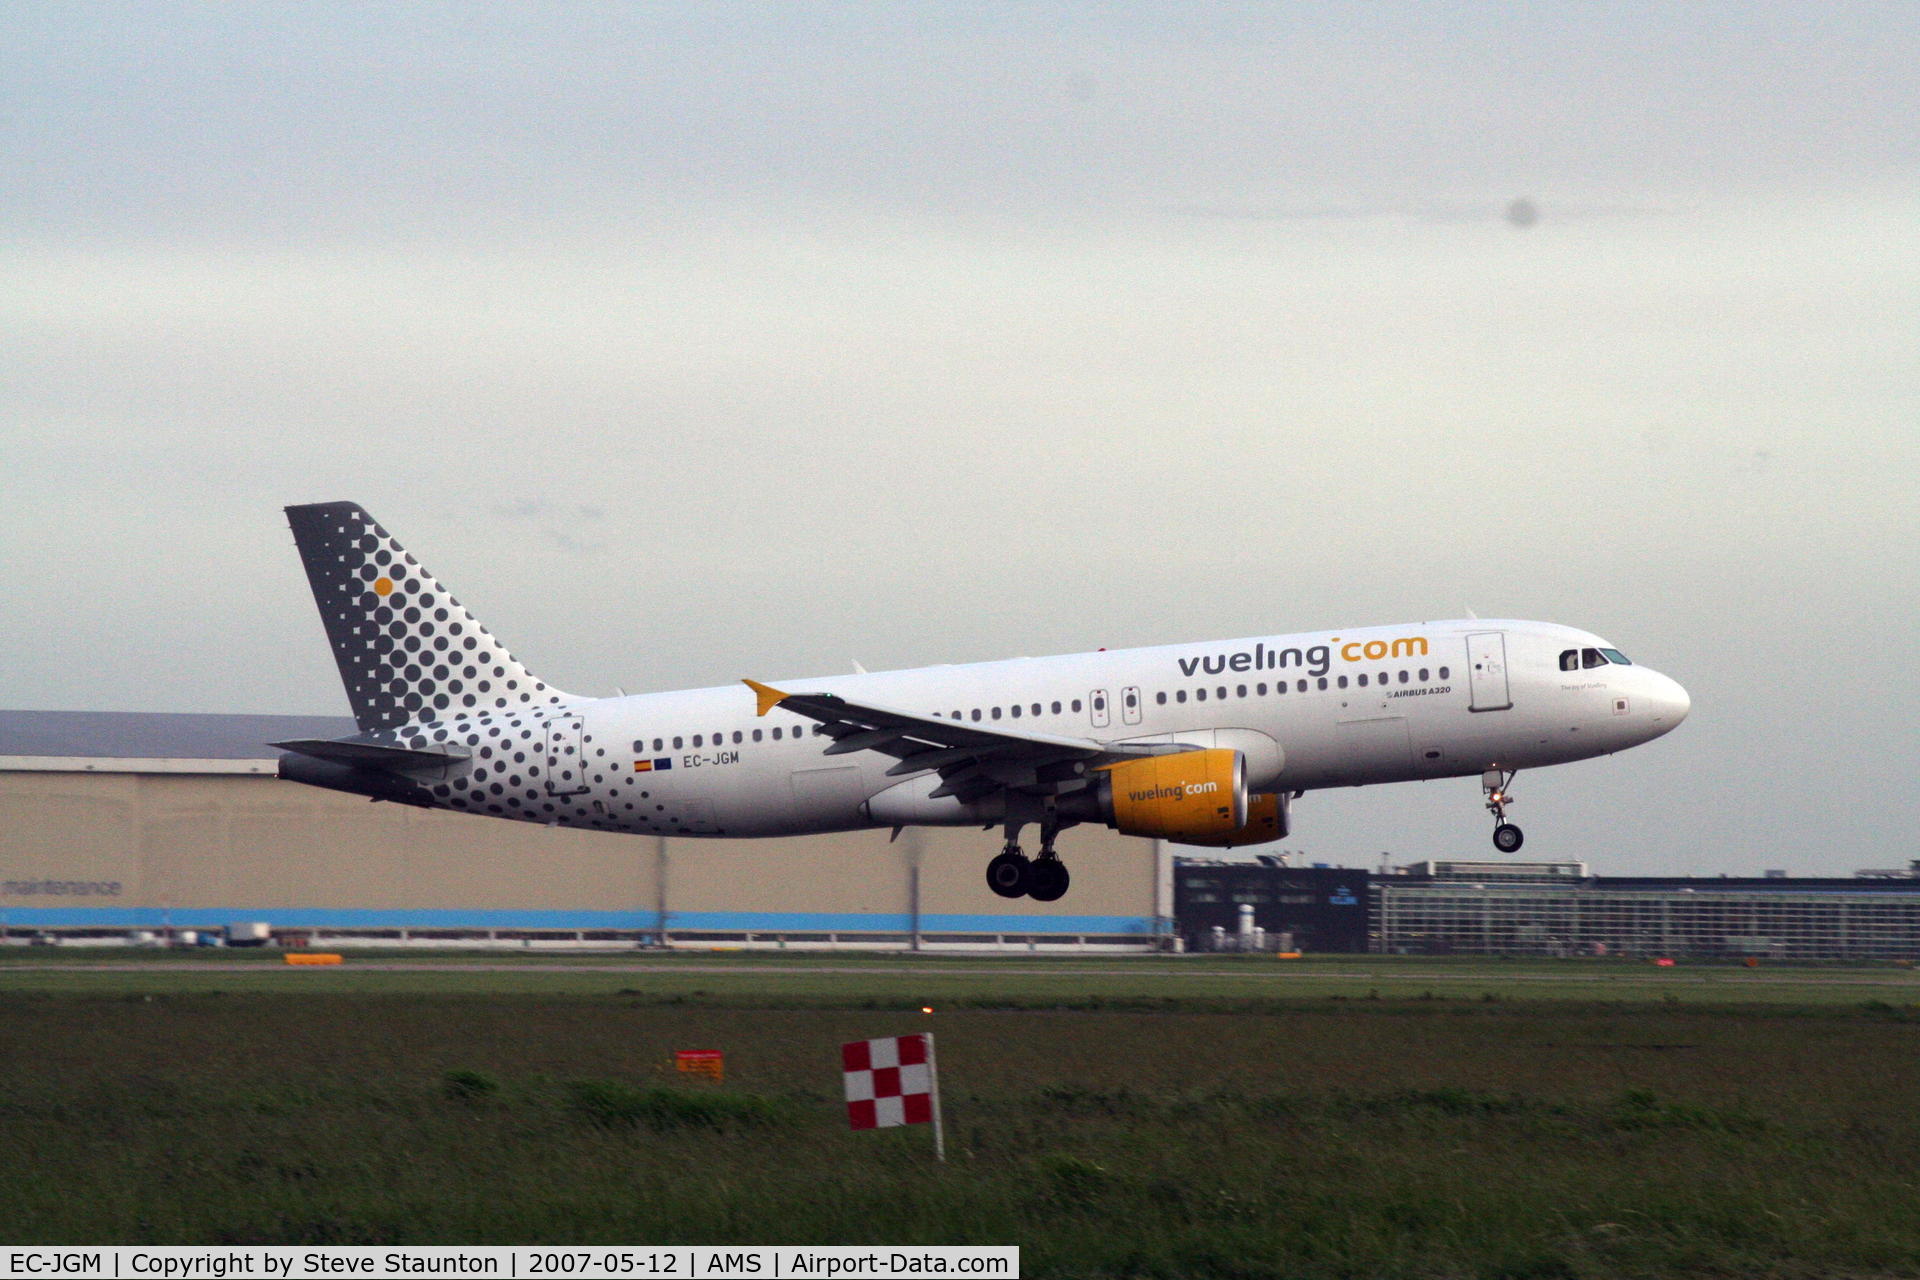 EC-JGM, 2005 Airbus A320-214 C/N 2407, Seen at AMS in the late evening gloom in May